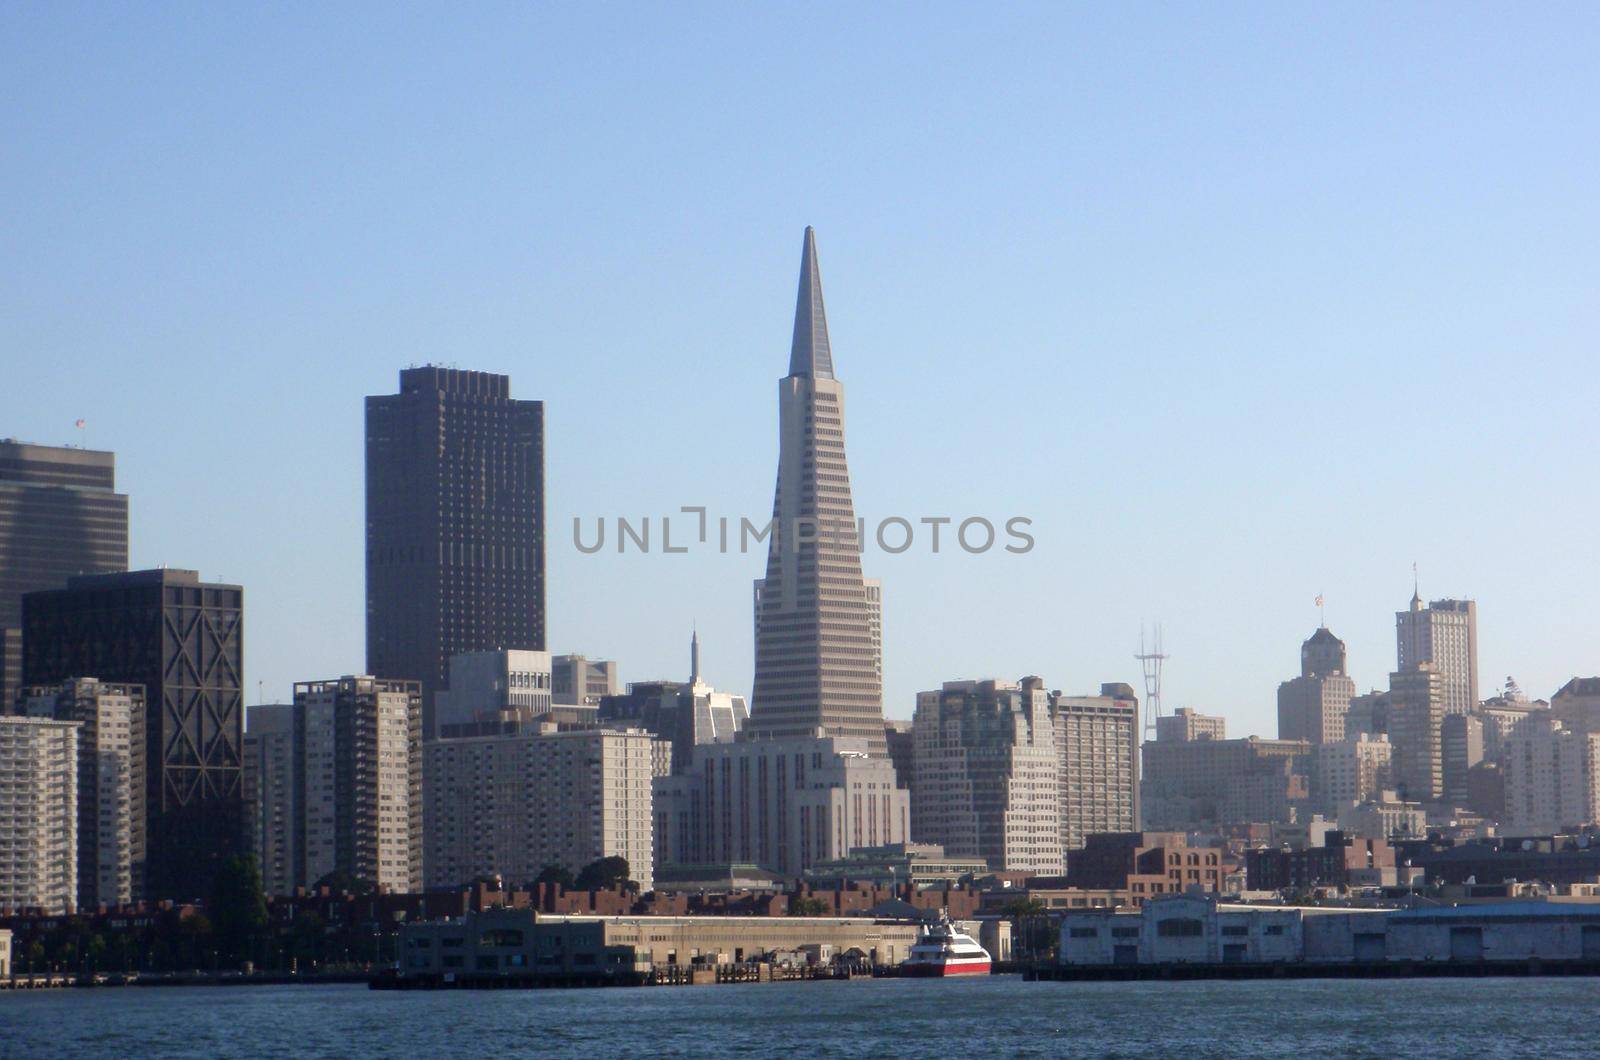 San Francisco from the water by EricGBVD